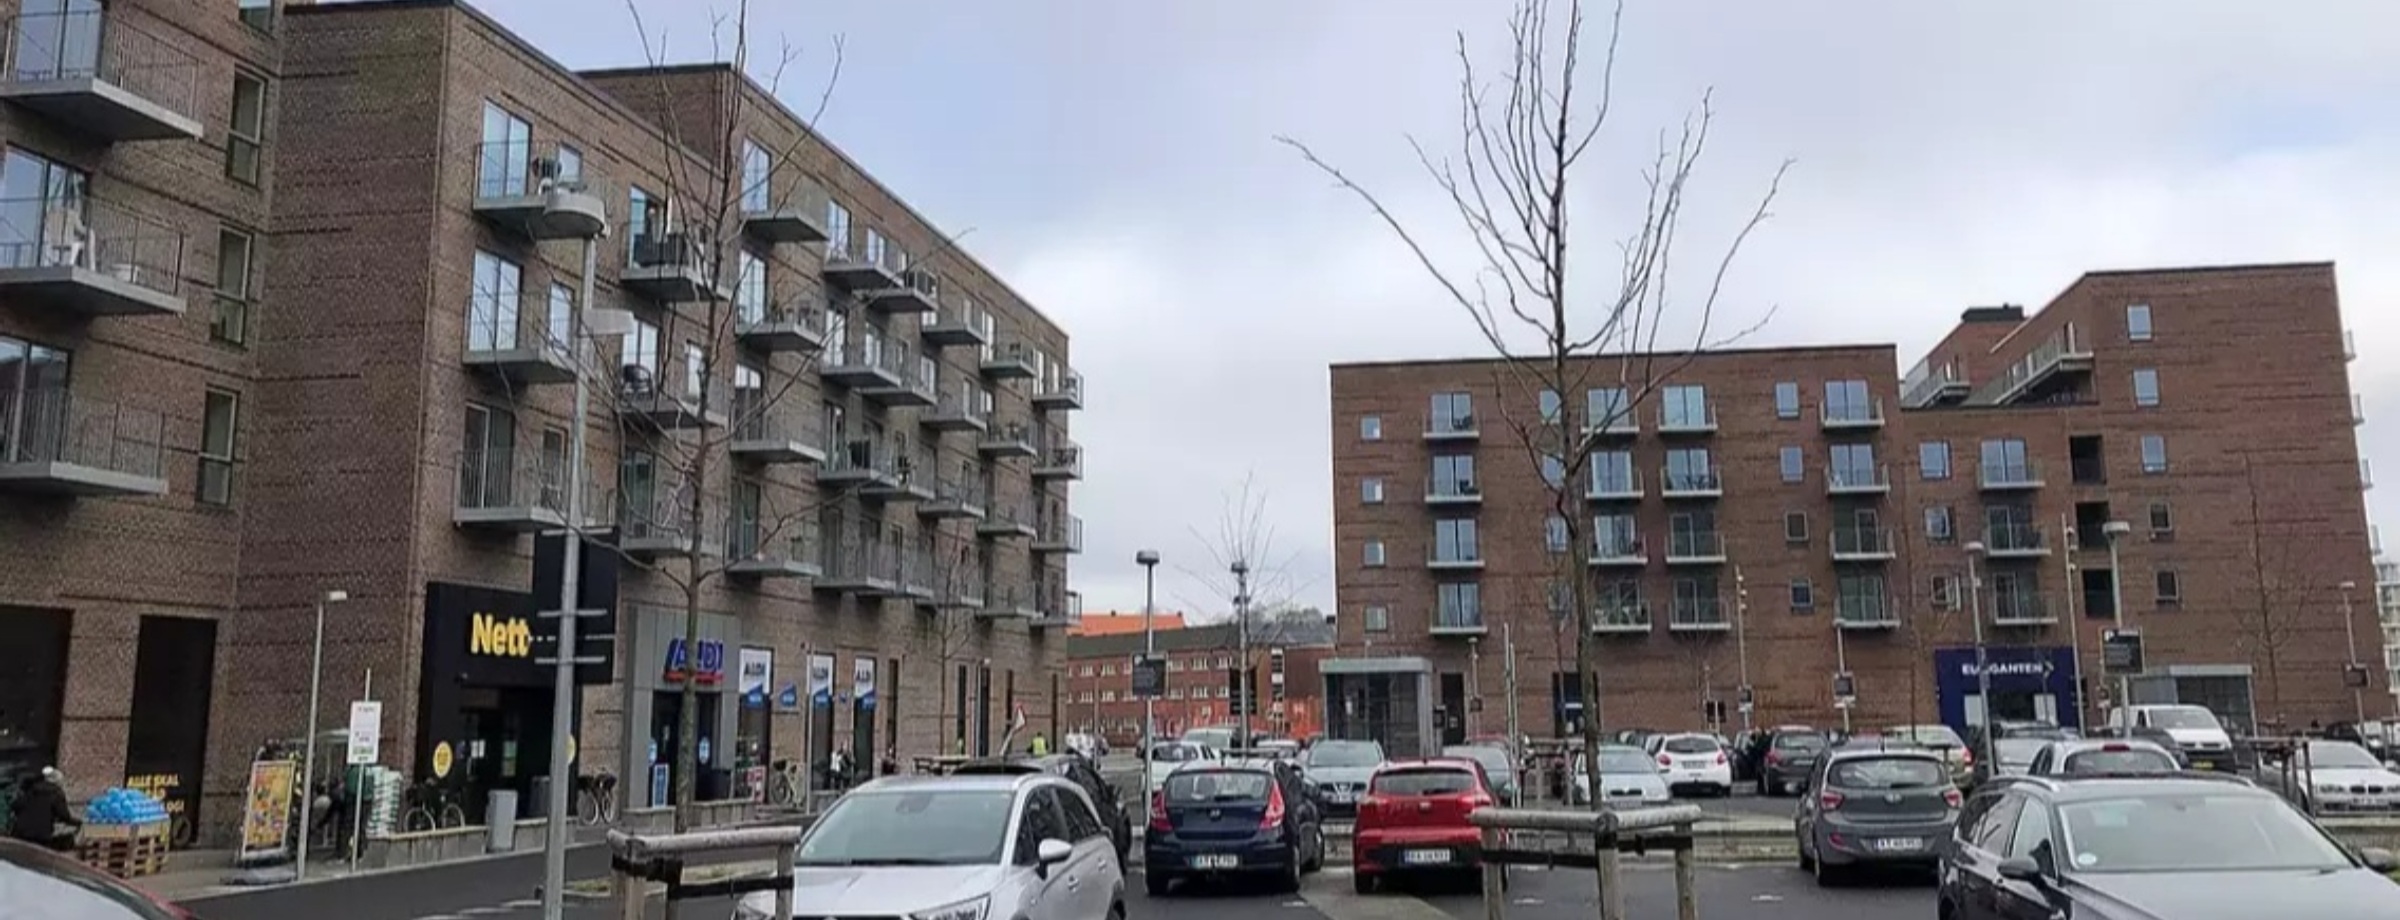 Is Lilli Gyldenkildes Torv in Denmark the ugliest new building in the nordic countries?